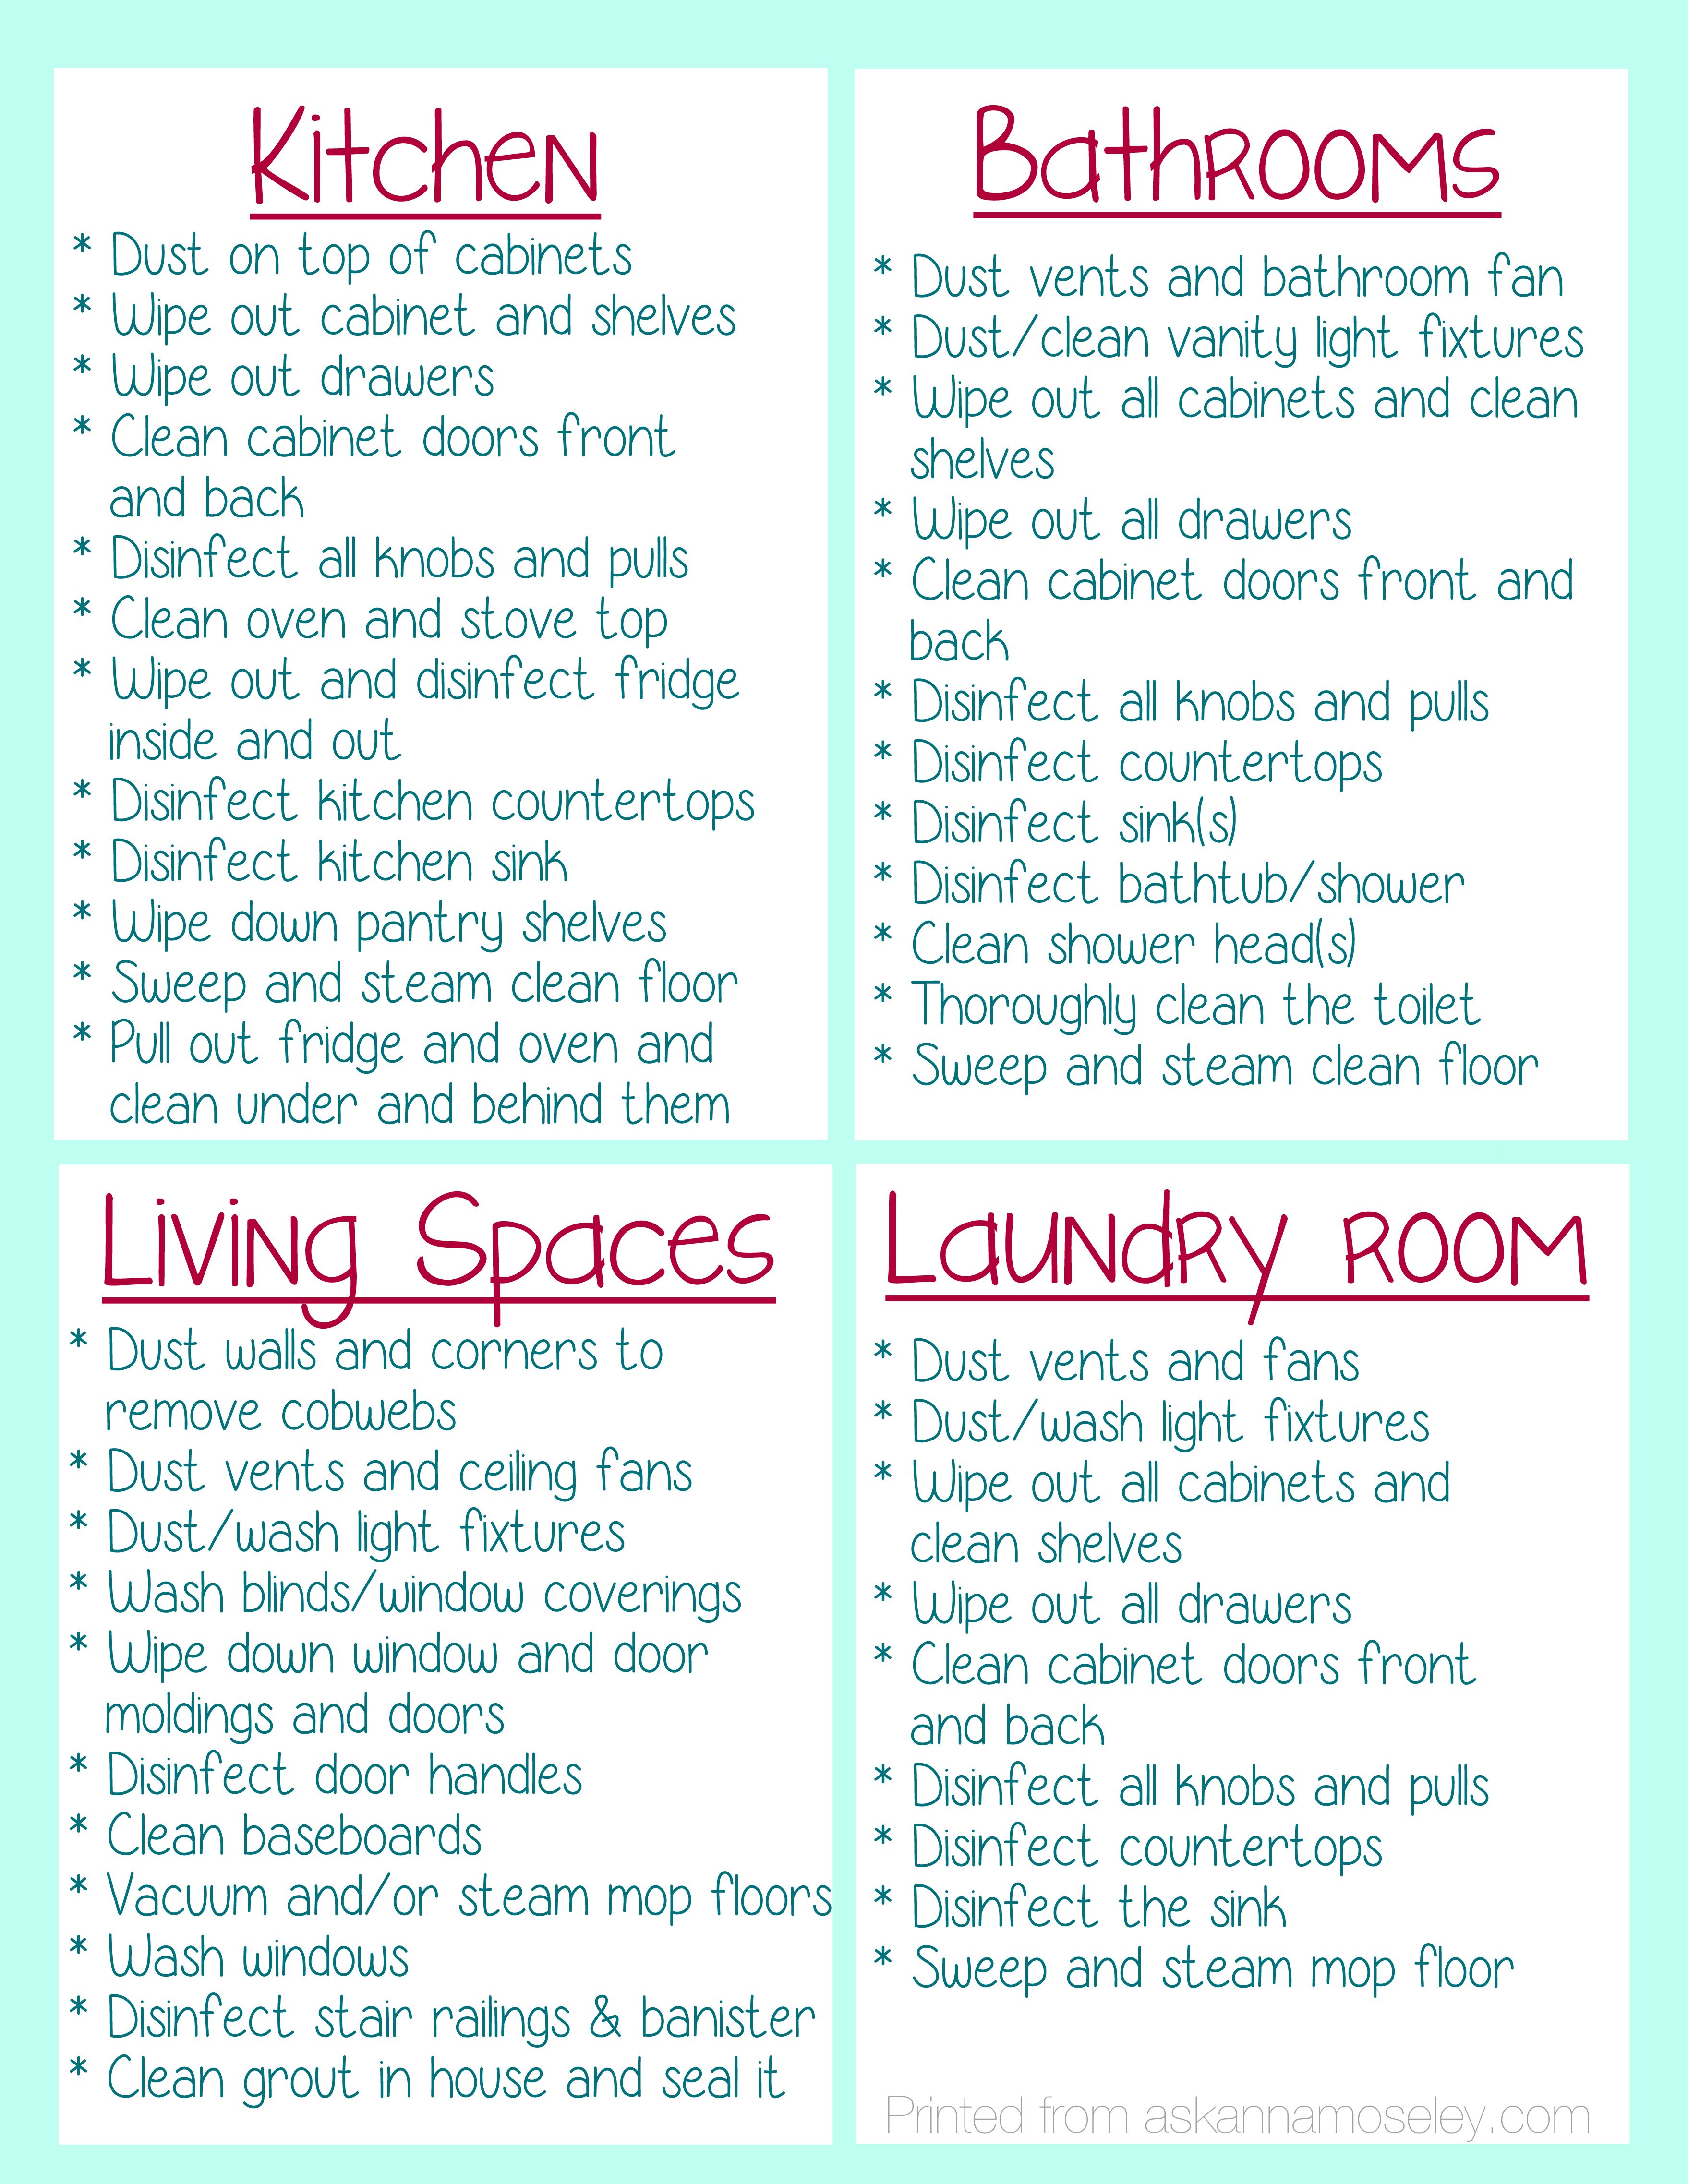 Checklist For A Well decorated Bedroom: Are You Sure You Have It All?